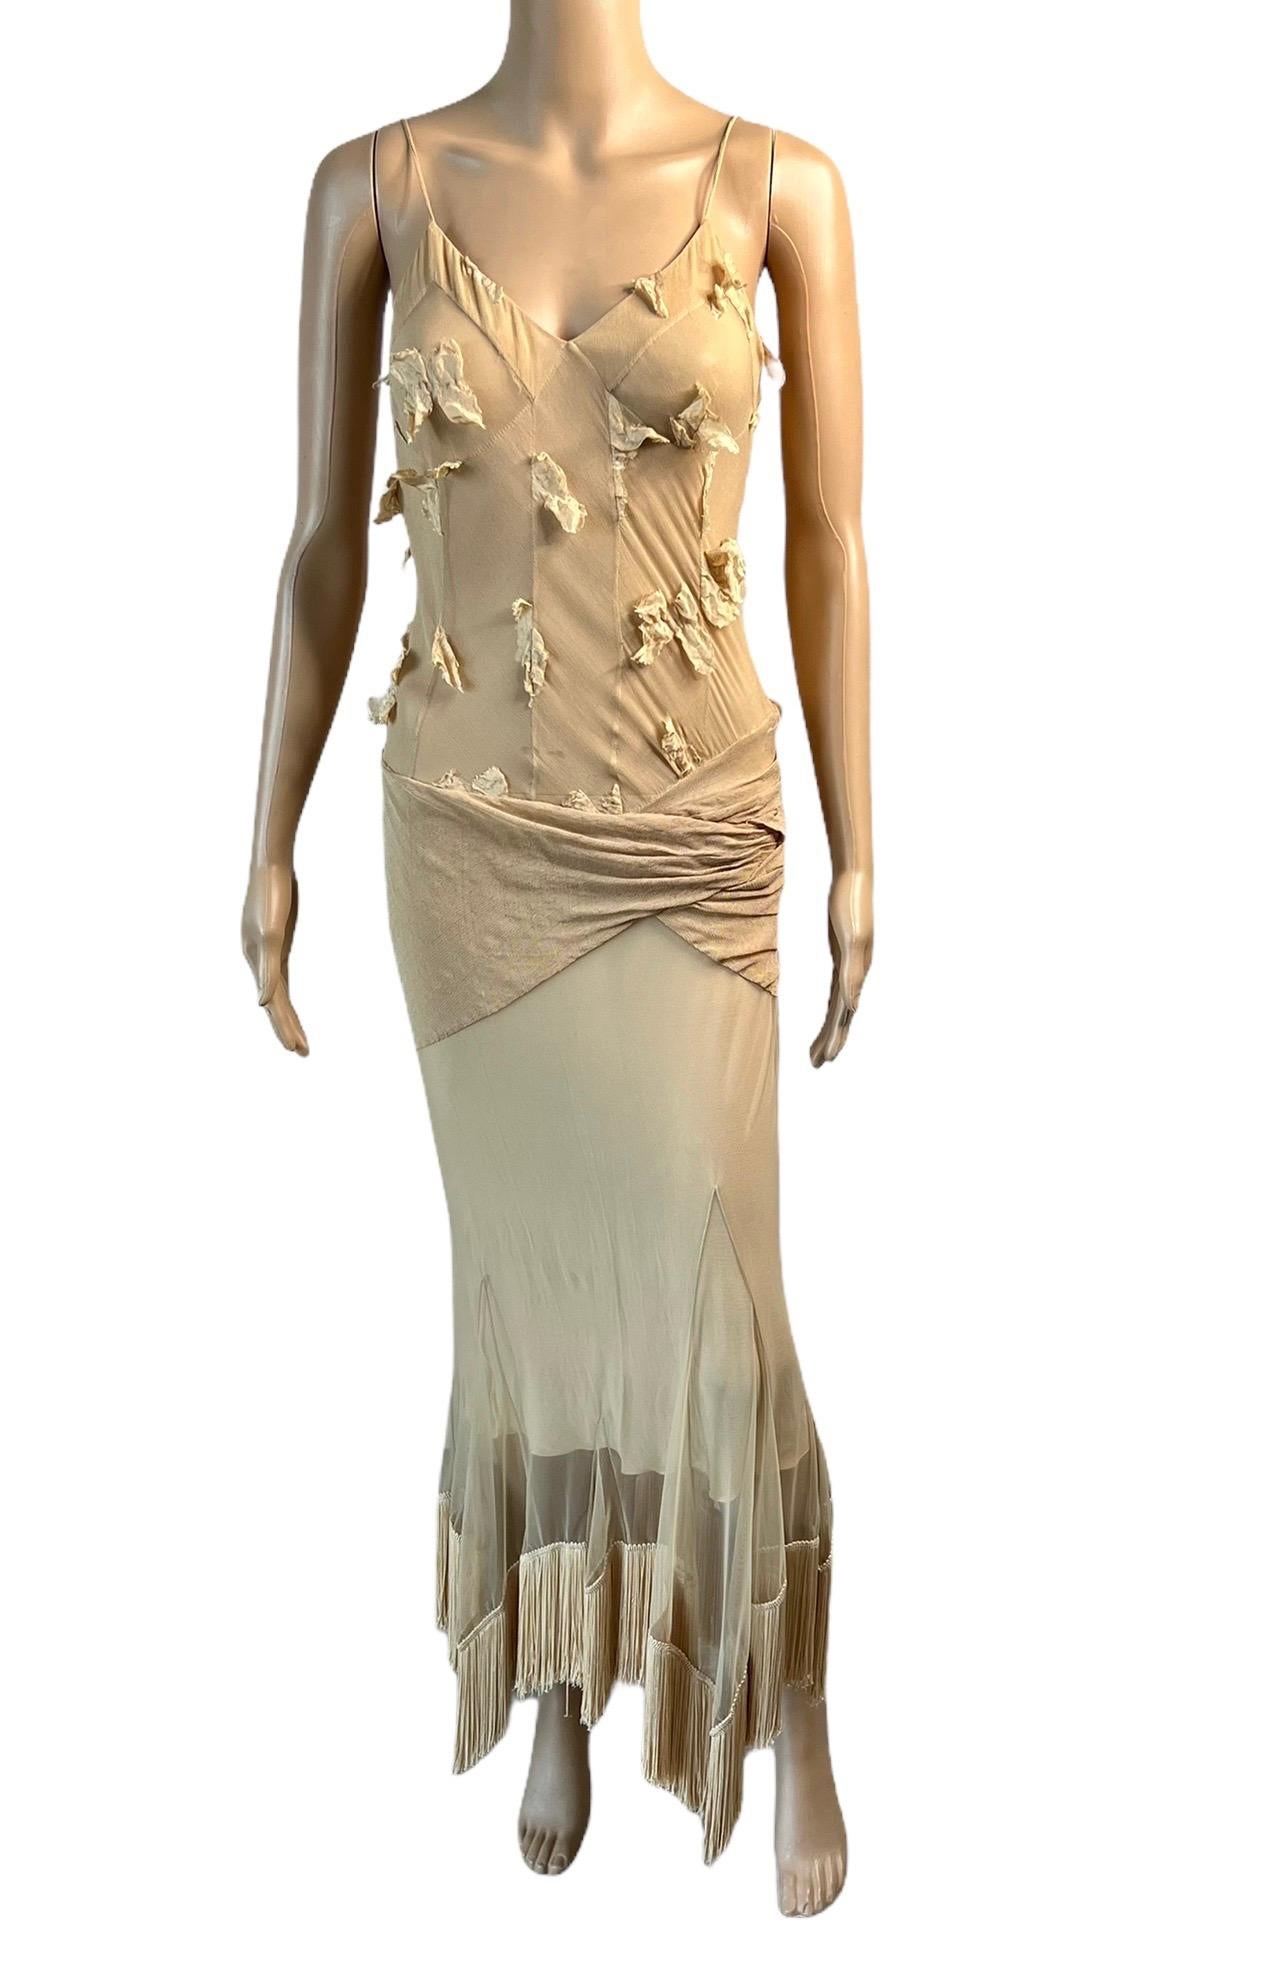 Beige Christian Dior by John Galliano S/S 2004 Sheer Mesh Fringed Evening Dress Gown